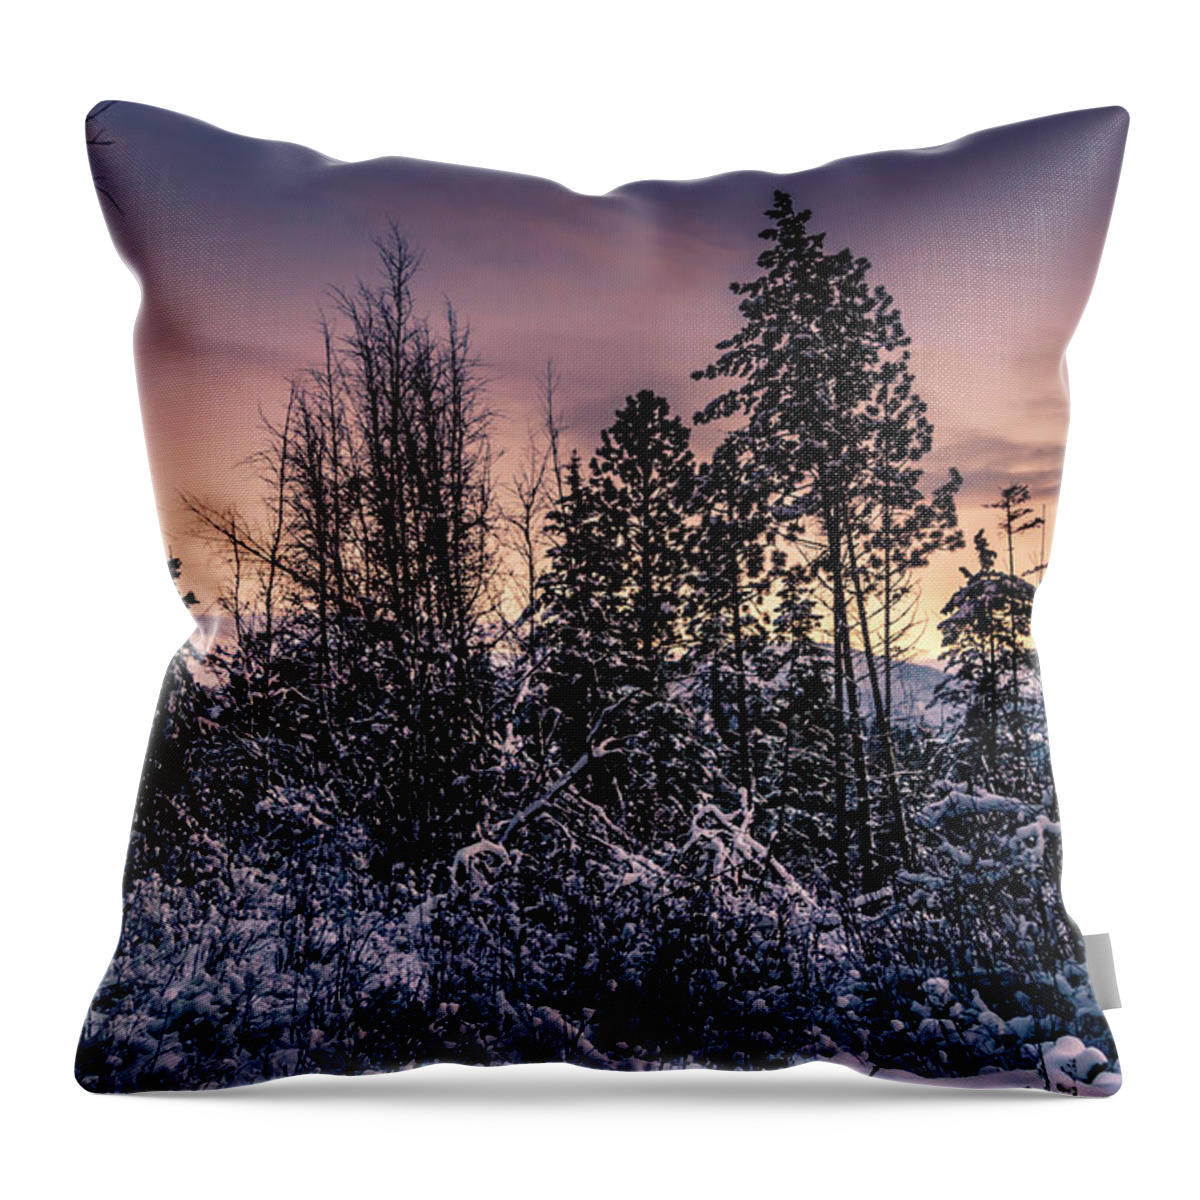 Photograph Throw Pillow featuring the photograph Snow Covered Pine Trees by Lester Plank